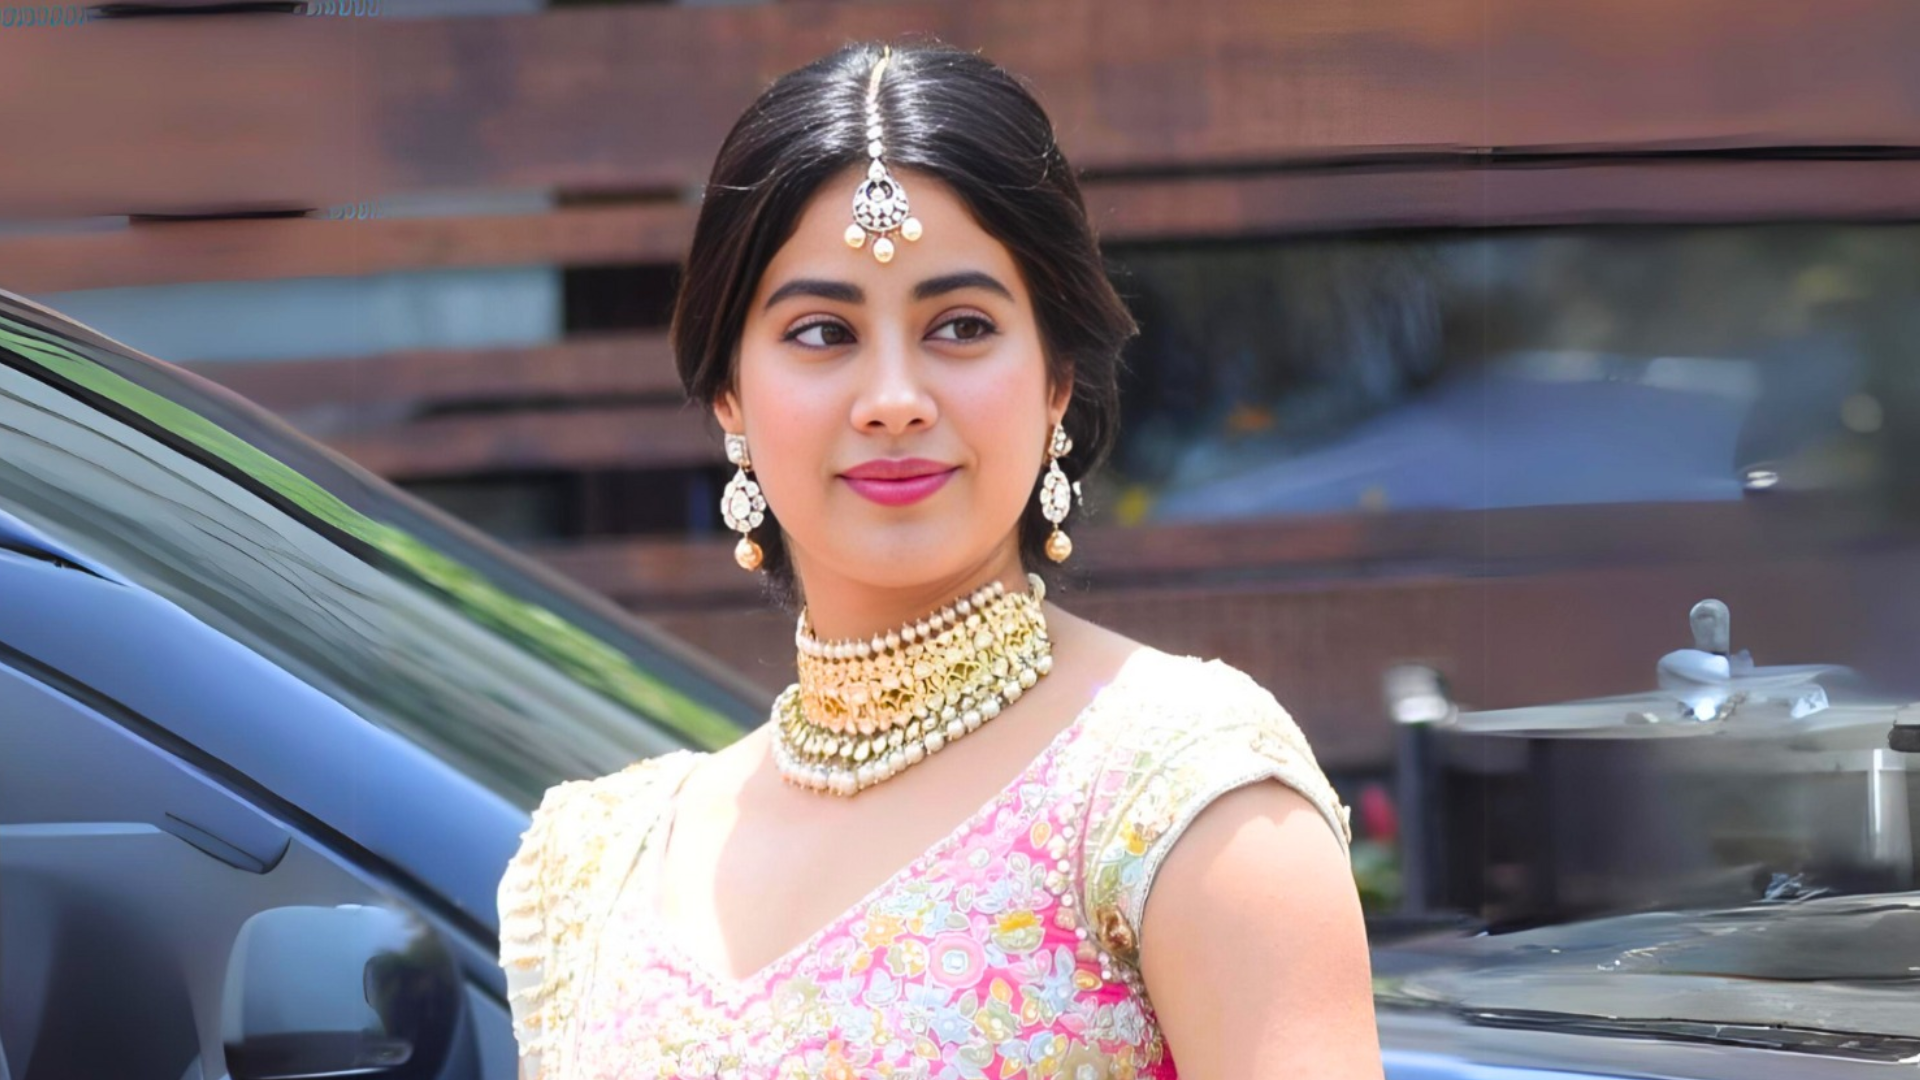 Janhvi Kapoor Calls CSK Star MS Dhoni Her Favourite Cricketer, Opens Up On Preparing For Her Role In 'Mr and Mrs Mahi'